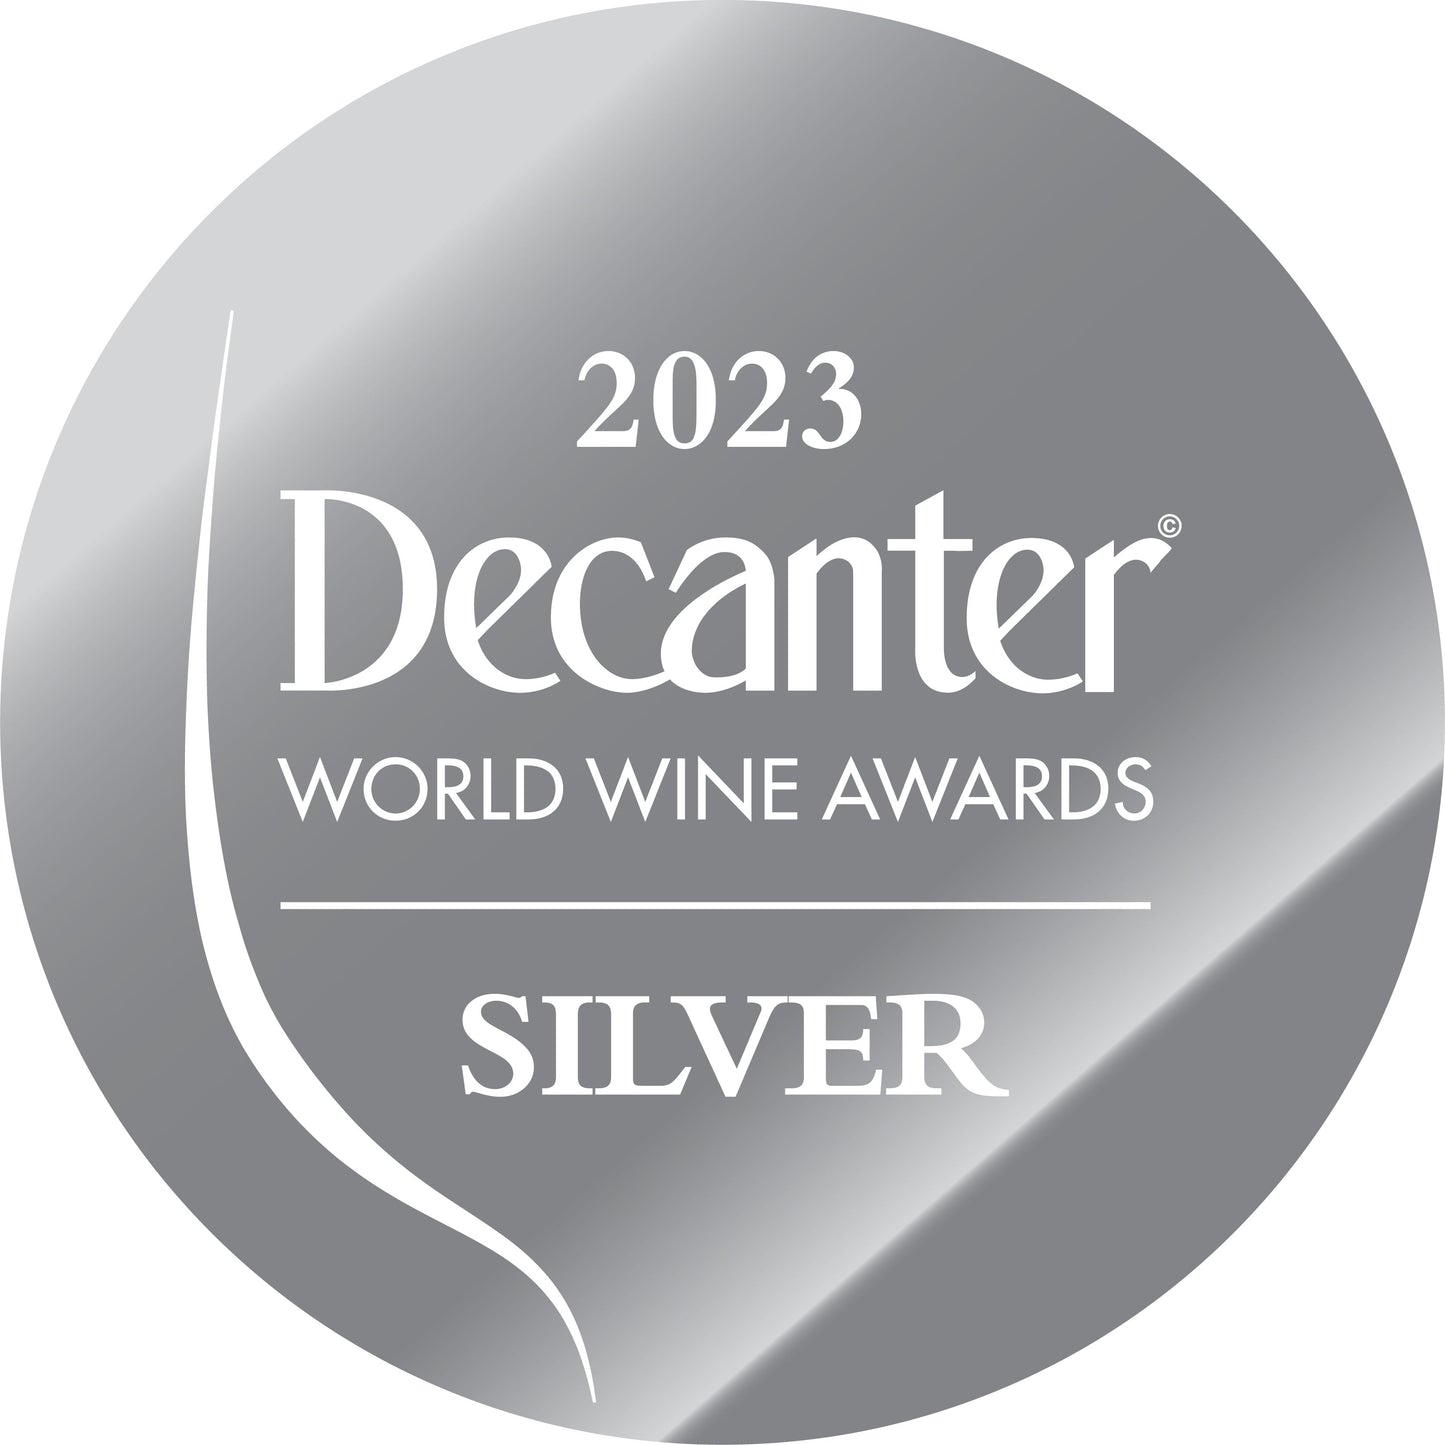 DWWA 2023 Silver GENERIC - Copyright of the medal artwork for 1000 labels